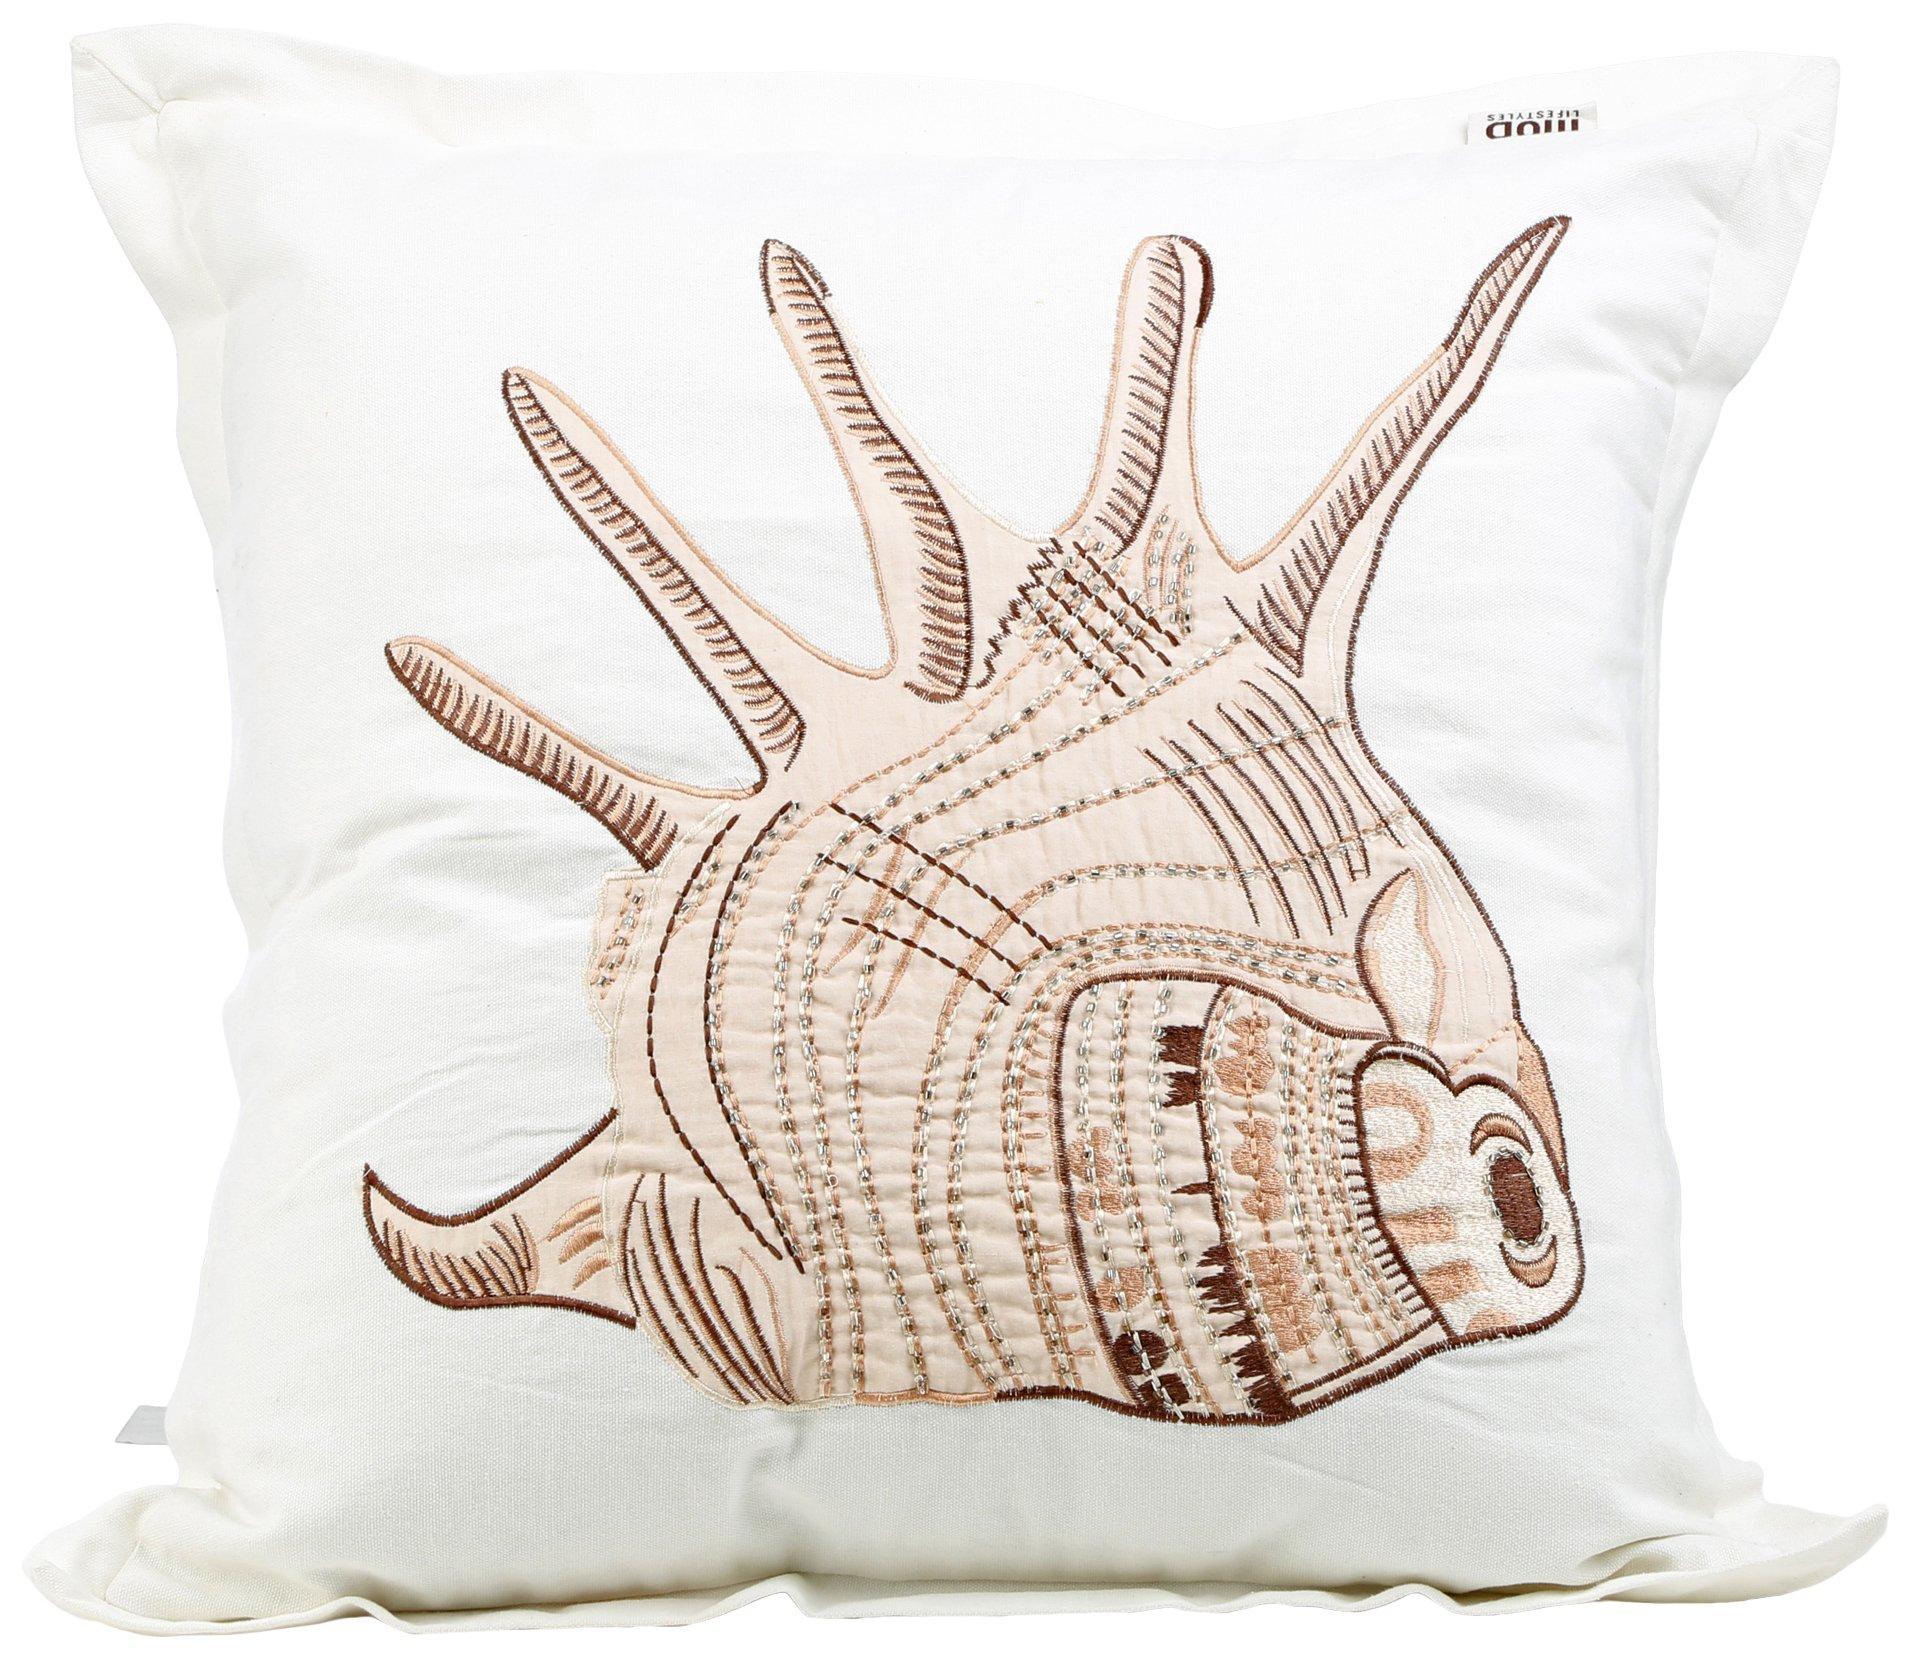 https://images.beallsflorida.com/i/beallsflorida/670-8092-5792-14-yyy/*20x20-Embroidered-Conch-Shell-Decorative-Pillow*?$product$&fmt=auto&qlt=default